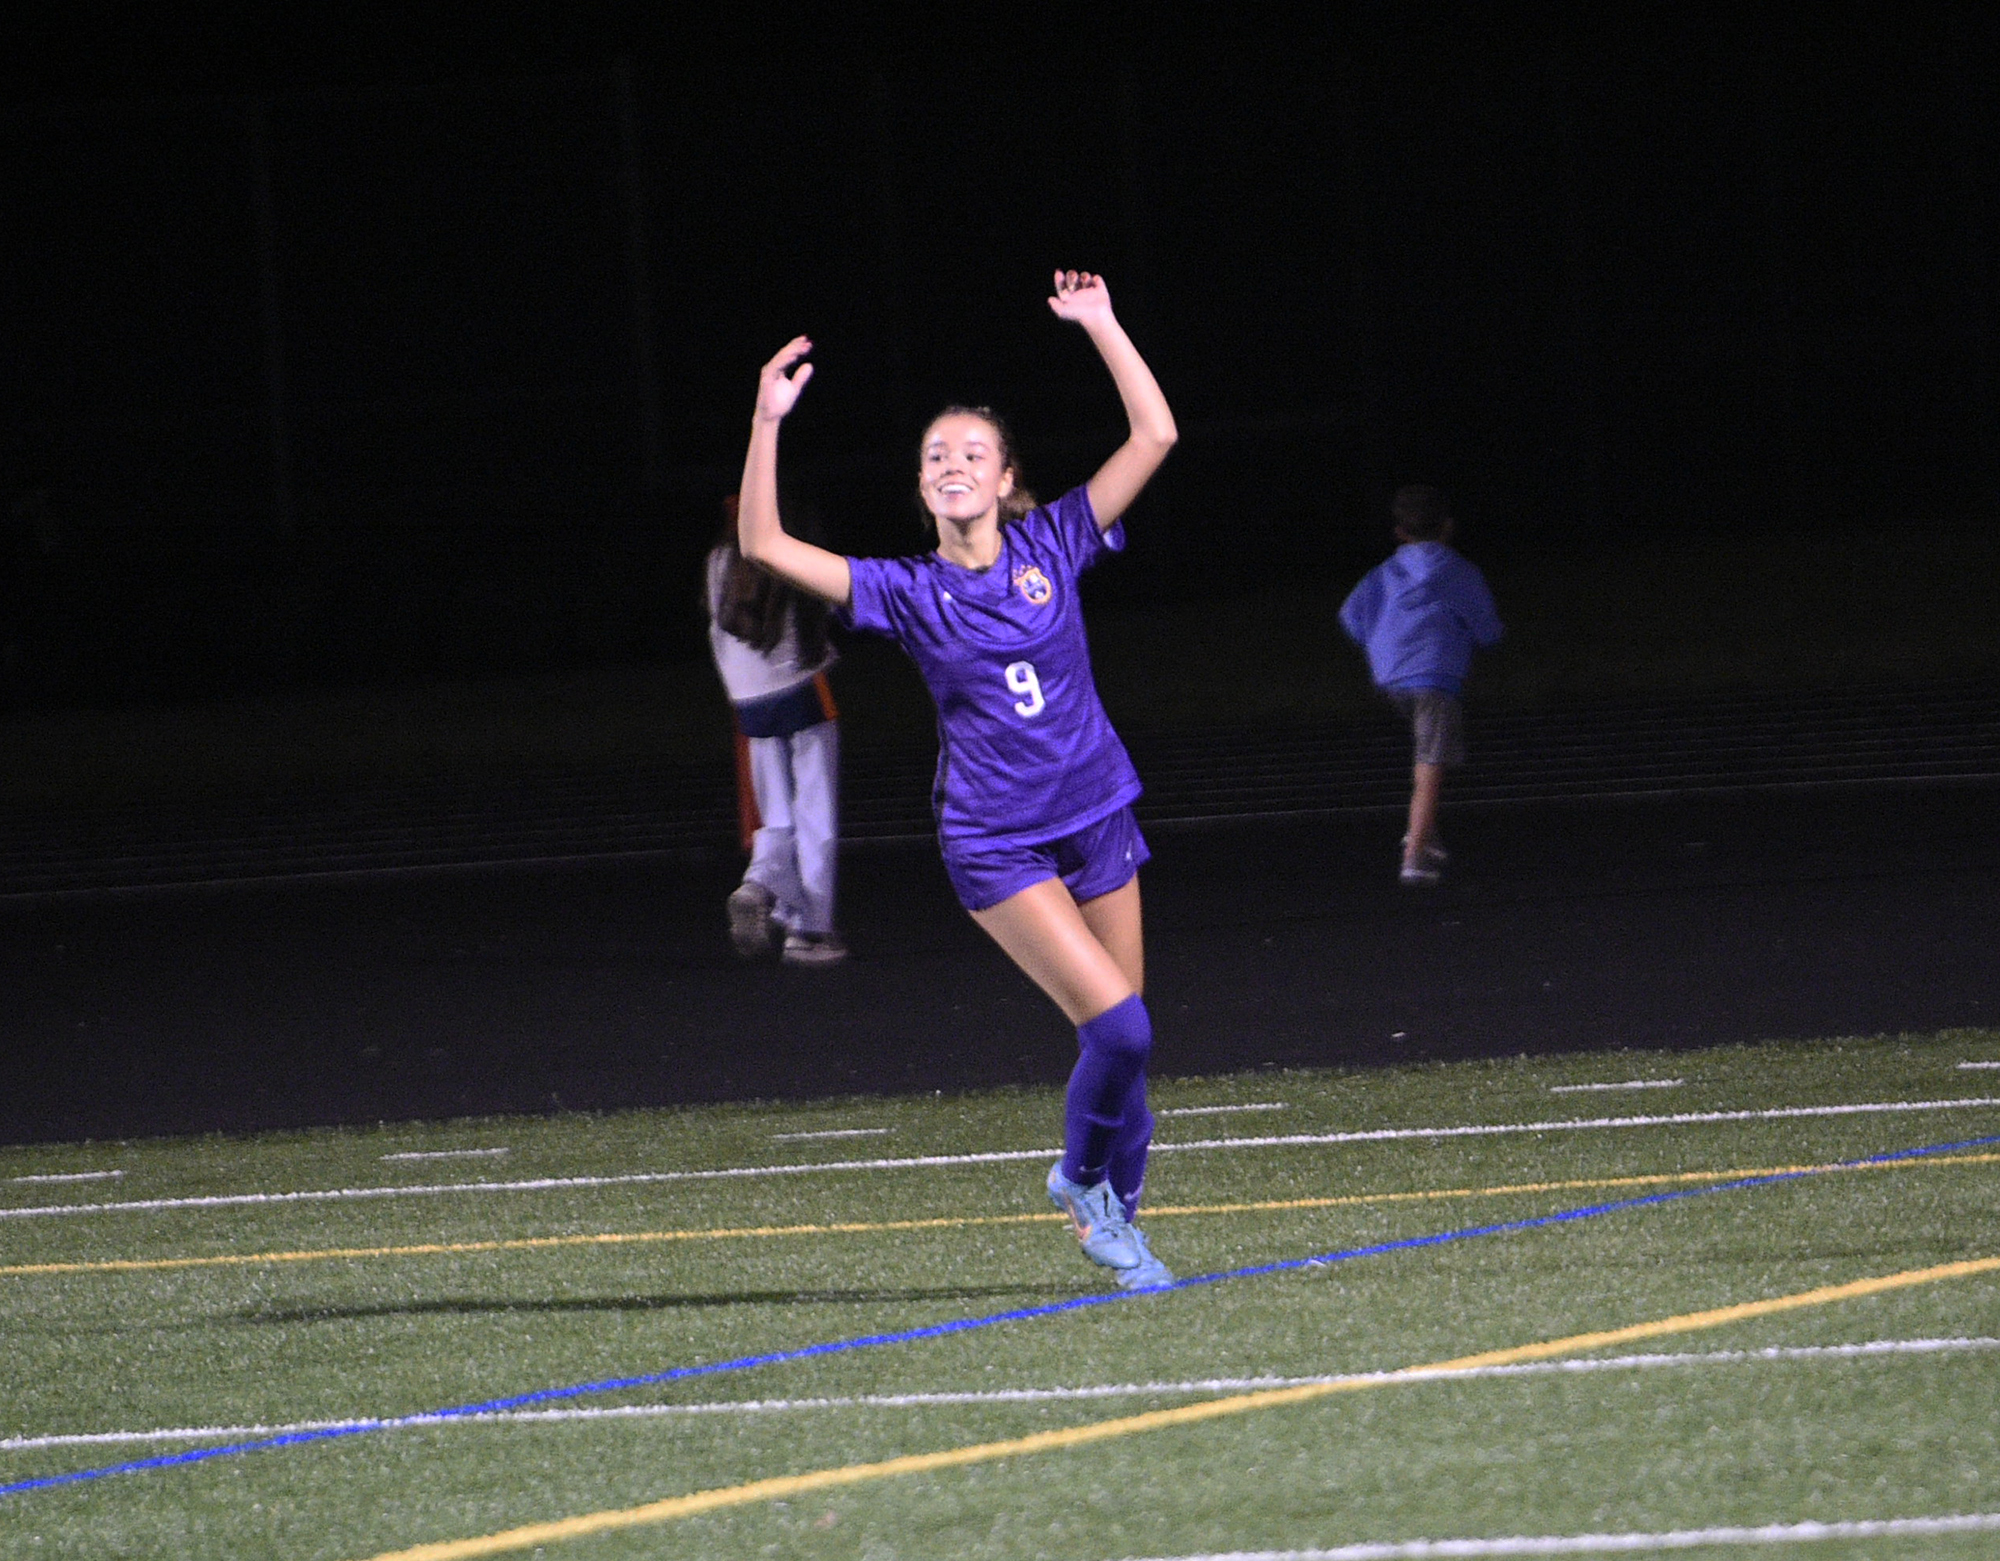 Columbia River’s Avah Eslinger (9) celebrates her goal in a 1-0 win over Ridgefield in girls soccer match at Columbia River High School on Tuesday, Oct. 3, 2023.